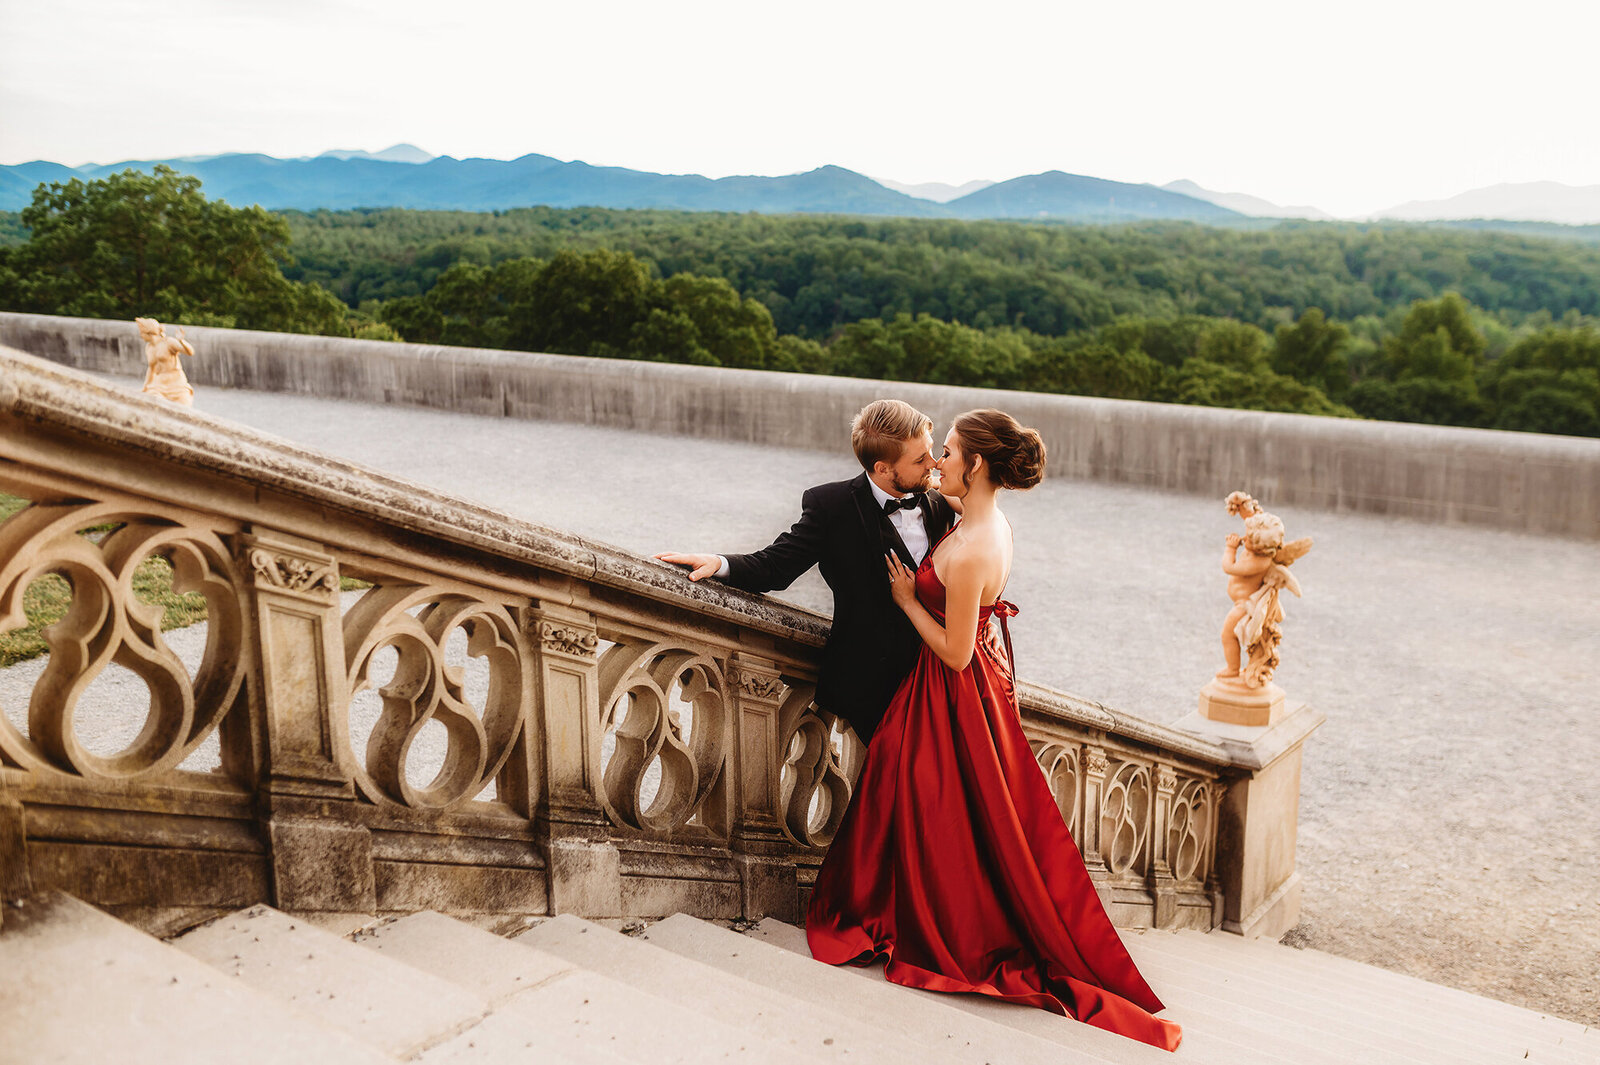 A couple poses for Engagement Photos at Biltmore Estate in Asheville, NC.